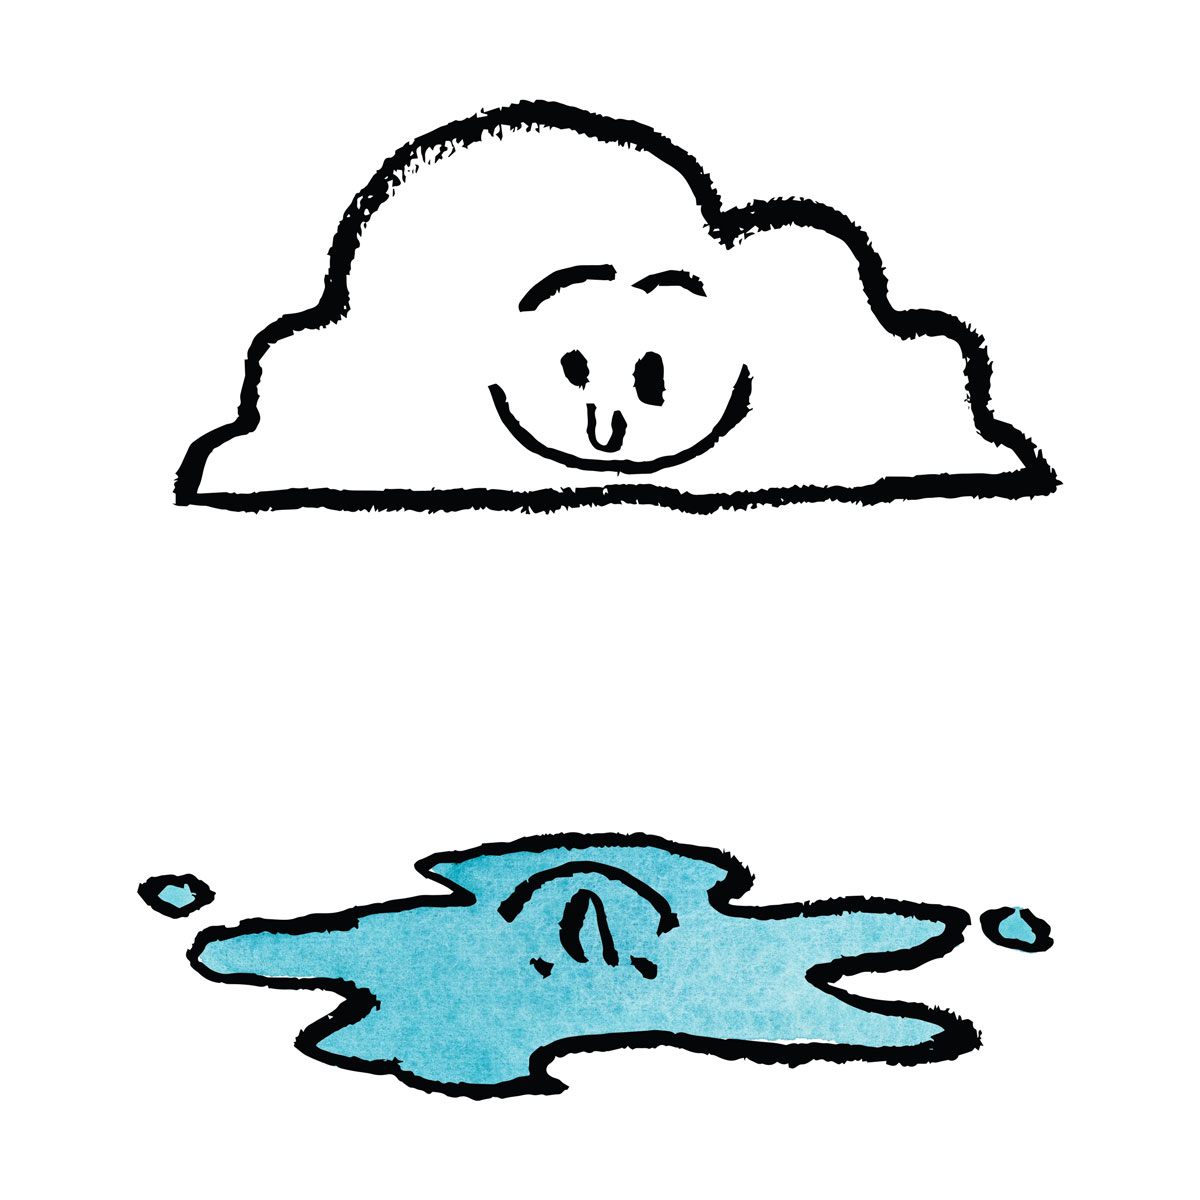 A cloud character smiling down at a puddle on the ground